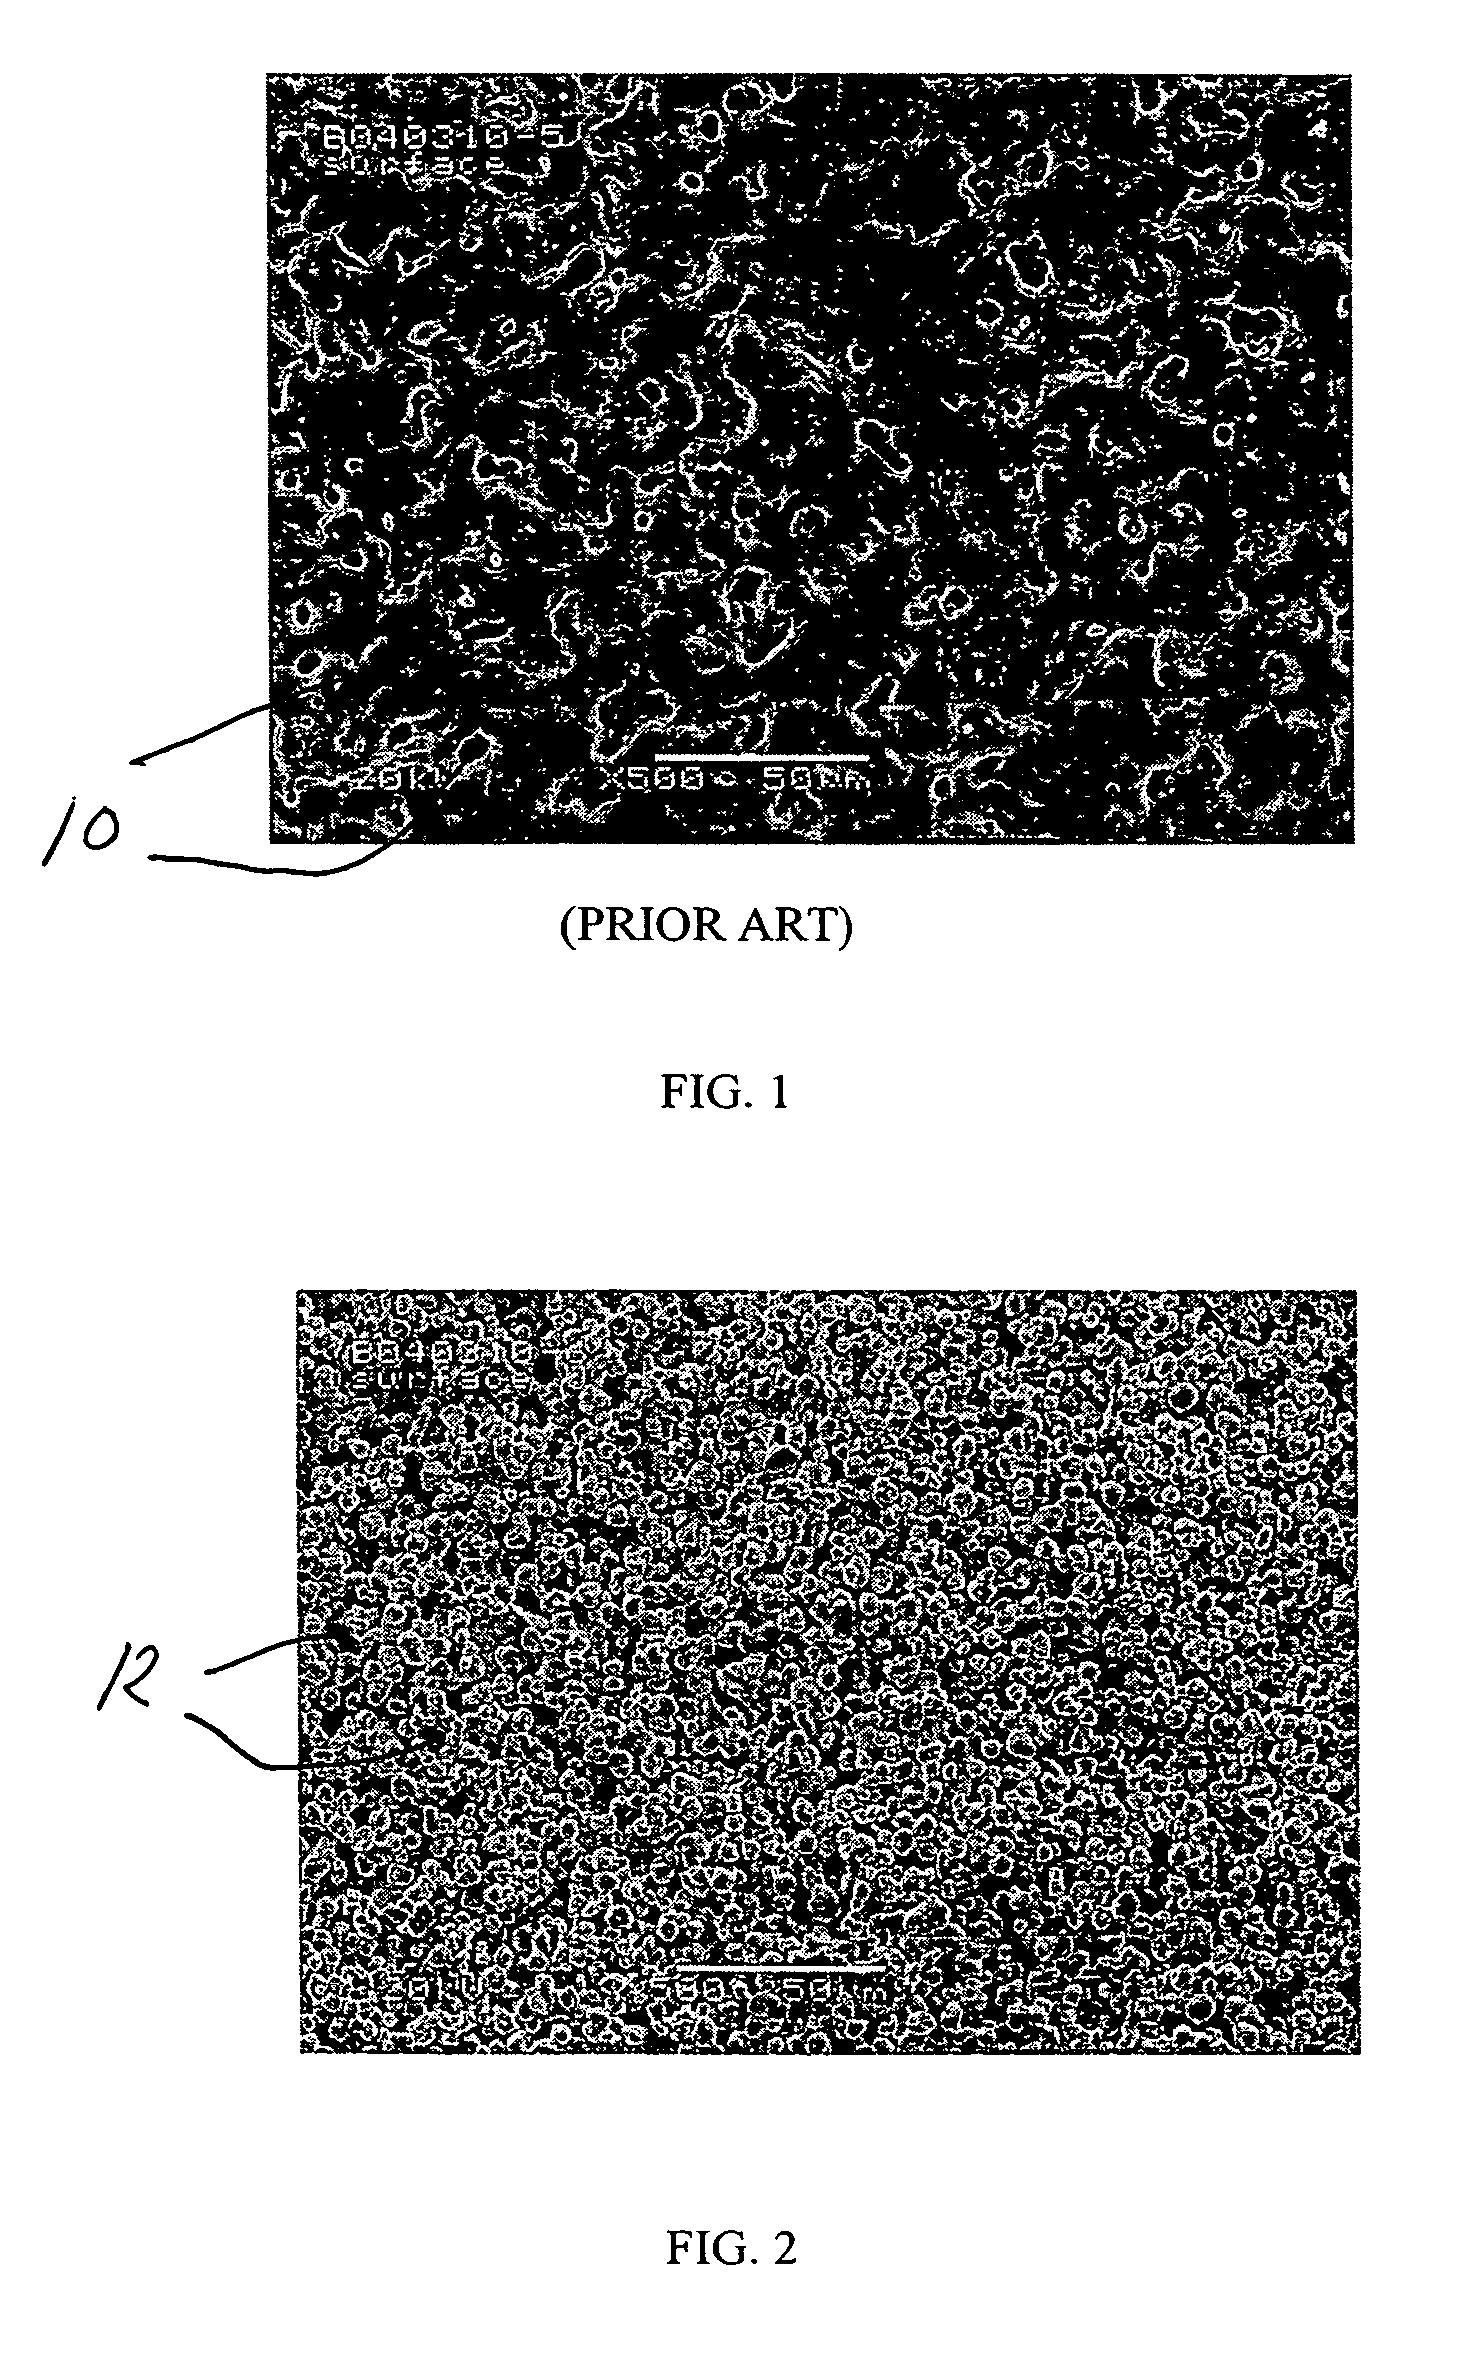 Current collector to conduct an electrical current to or from an electrode layer